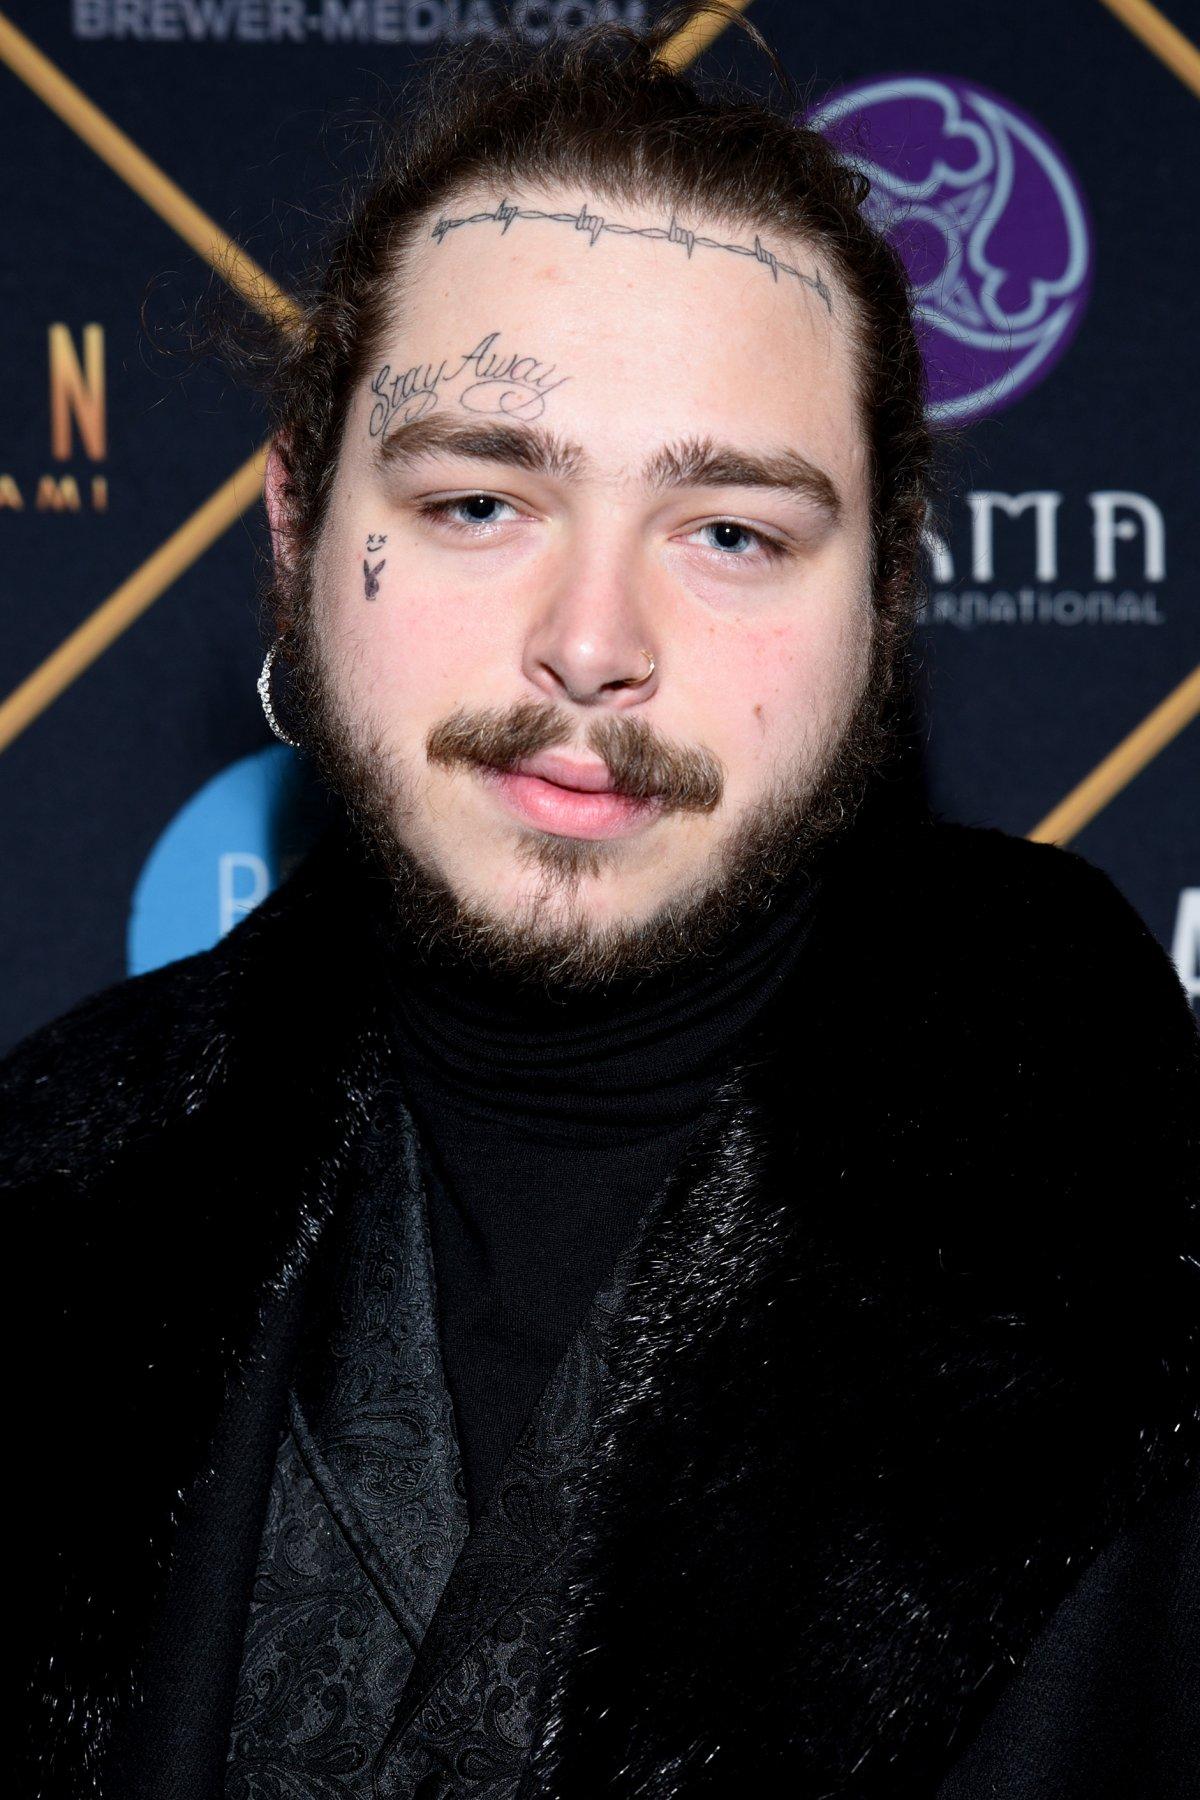 Post Malone releases tracklist for new album 'Hollywood's